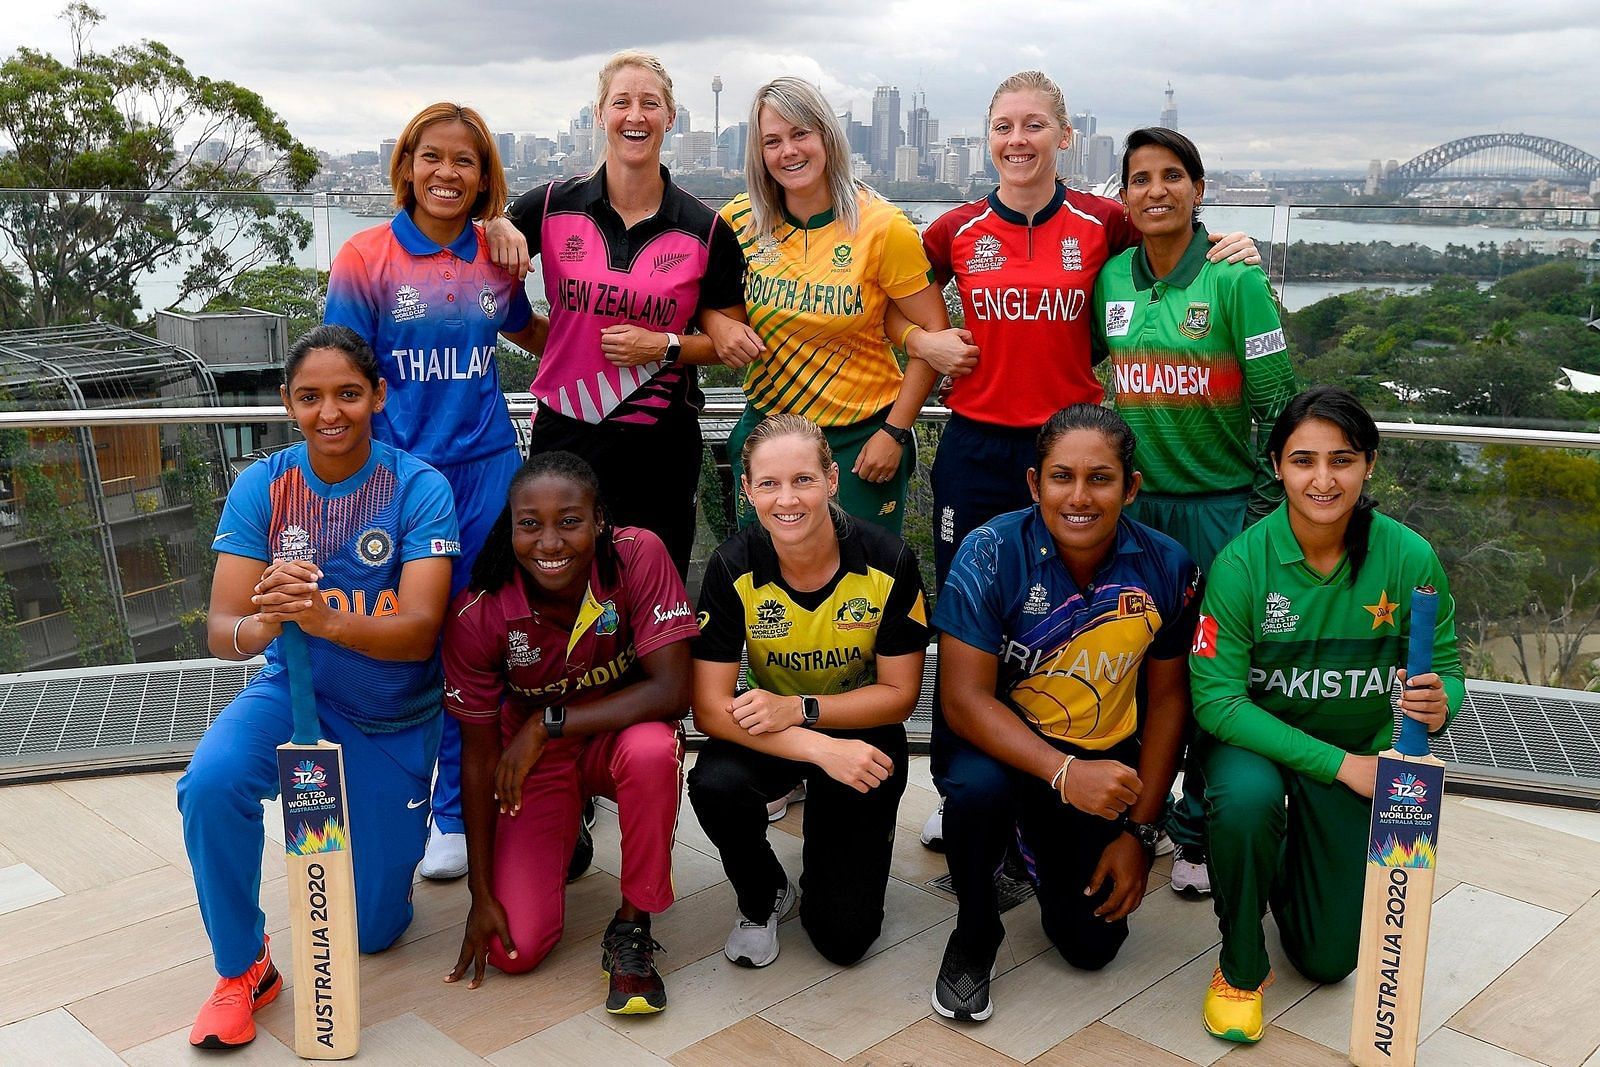 Icc Announces Equal Prize Money For Mens And Womens Teams For All Events